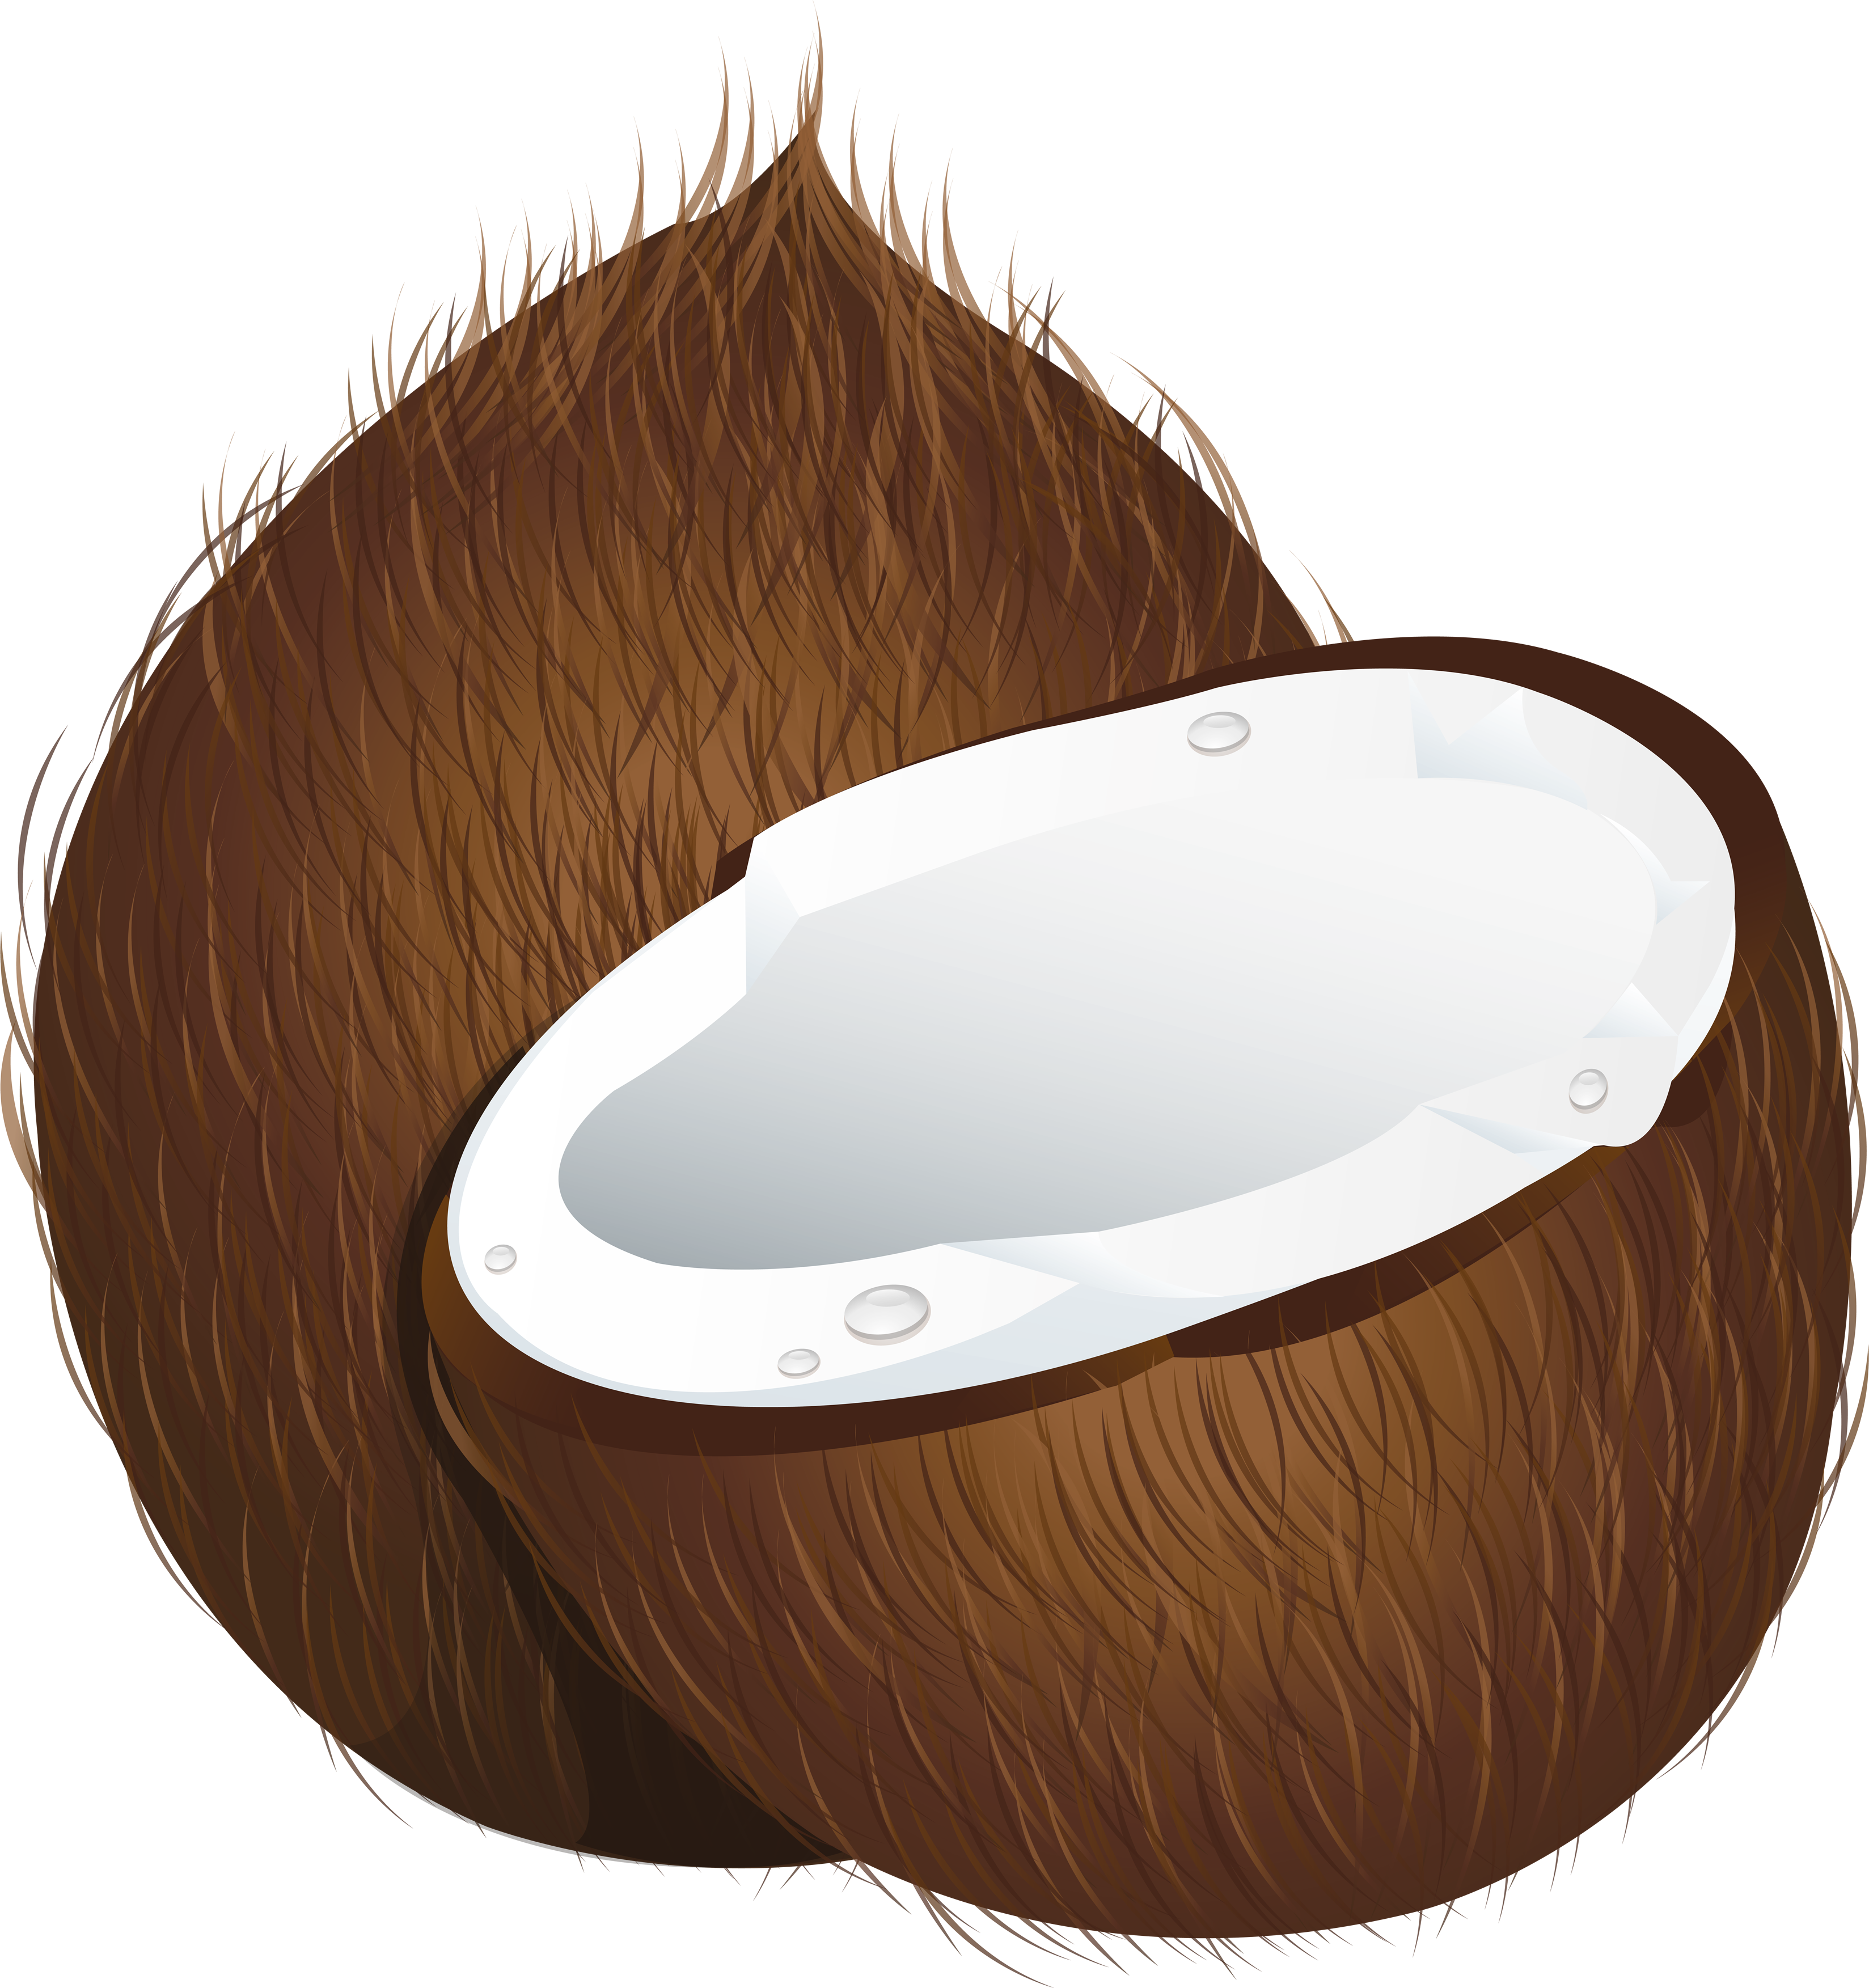 Coconut clipart copra. Png images free download